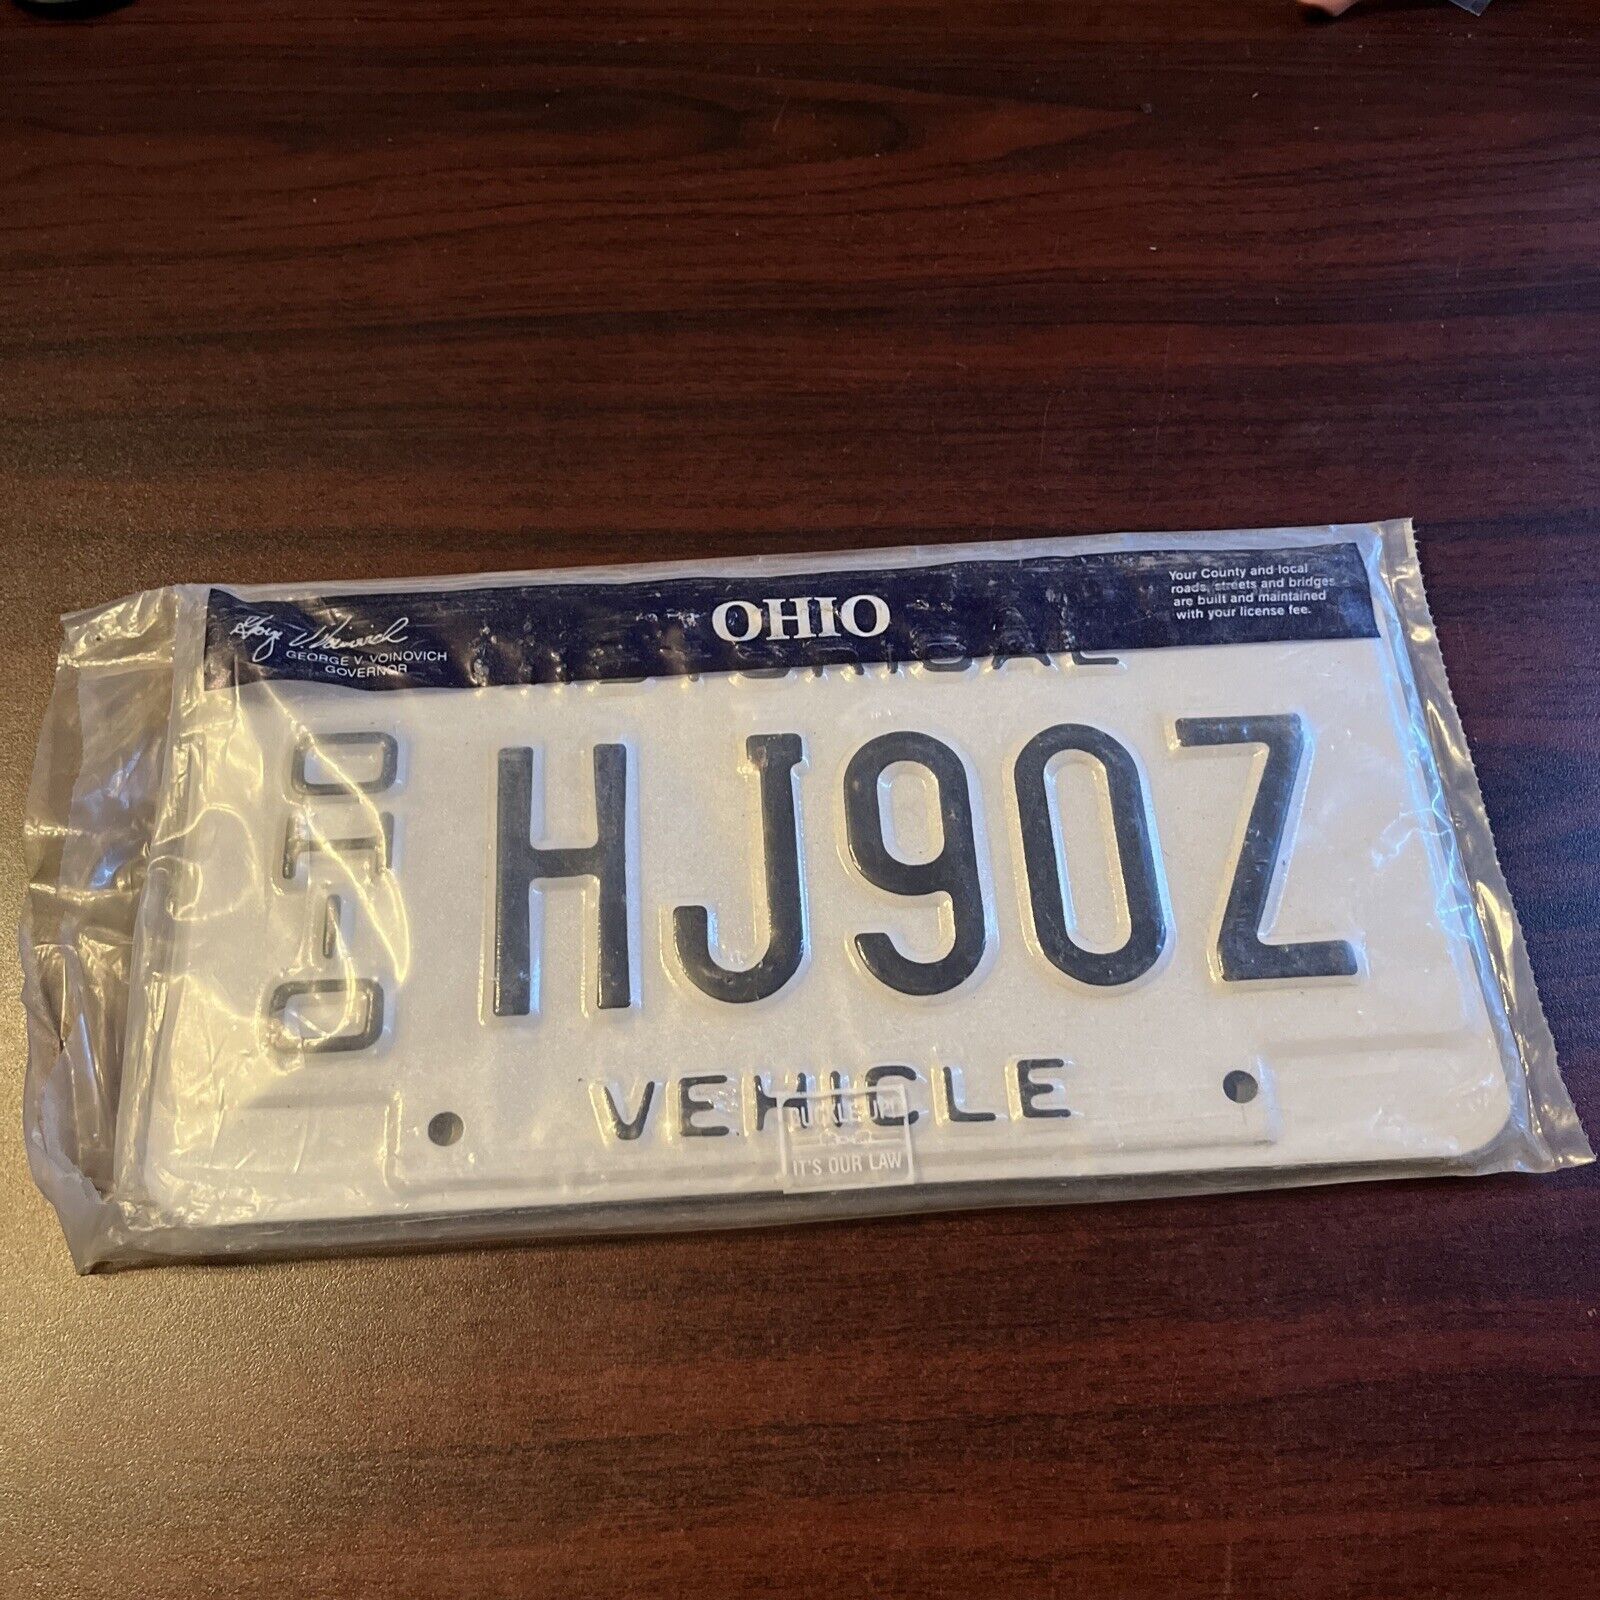 1990s Ohio Historical Vehicle Plate Pair HJ90Z